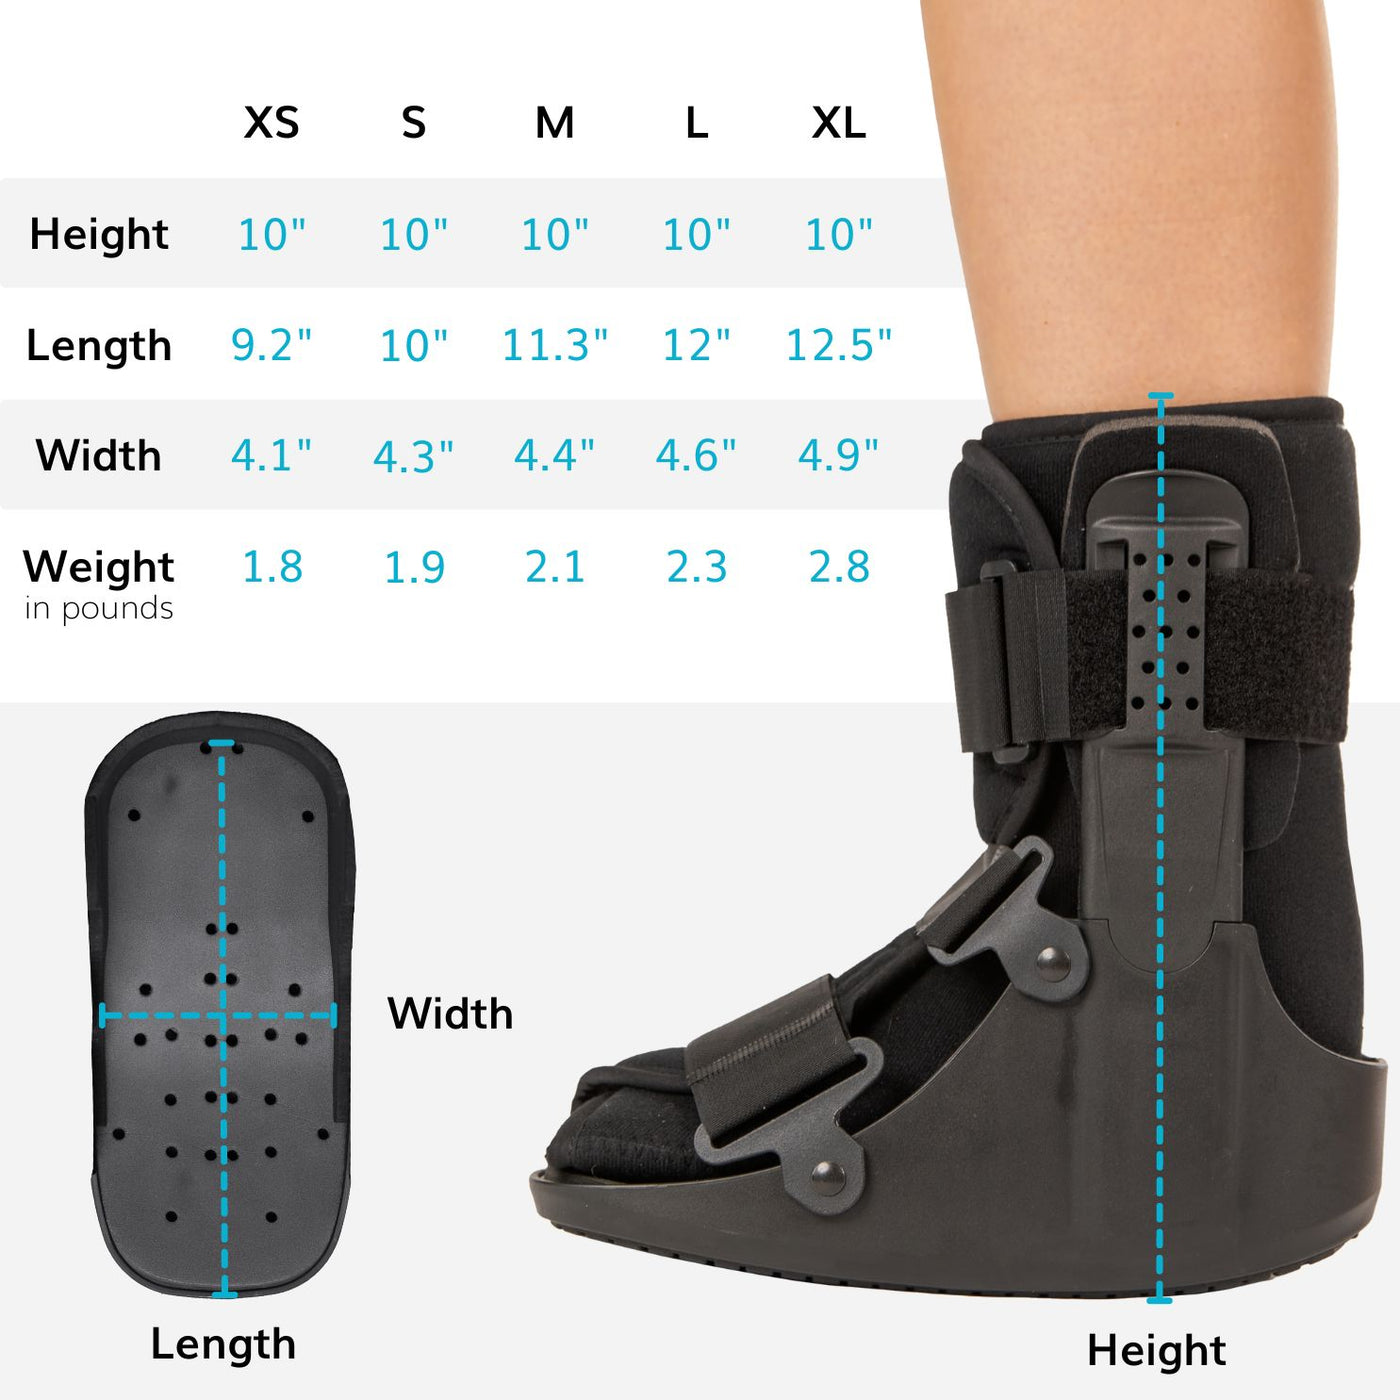 Short Walking Boot | Orthopedic Broken Toe Brace for Fast Recovery from Fractures and Foot Injuries